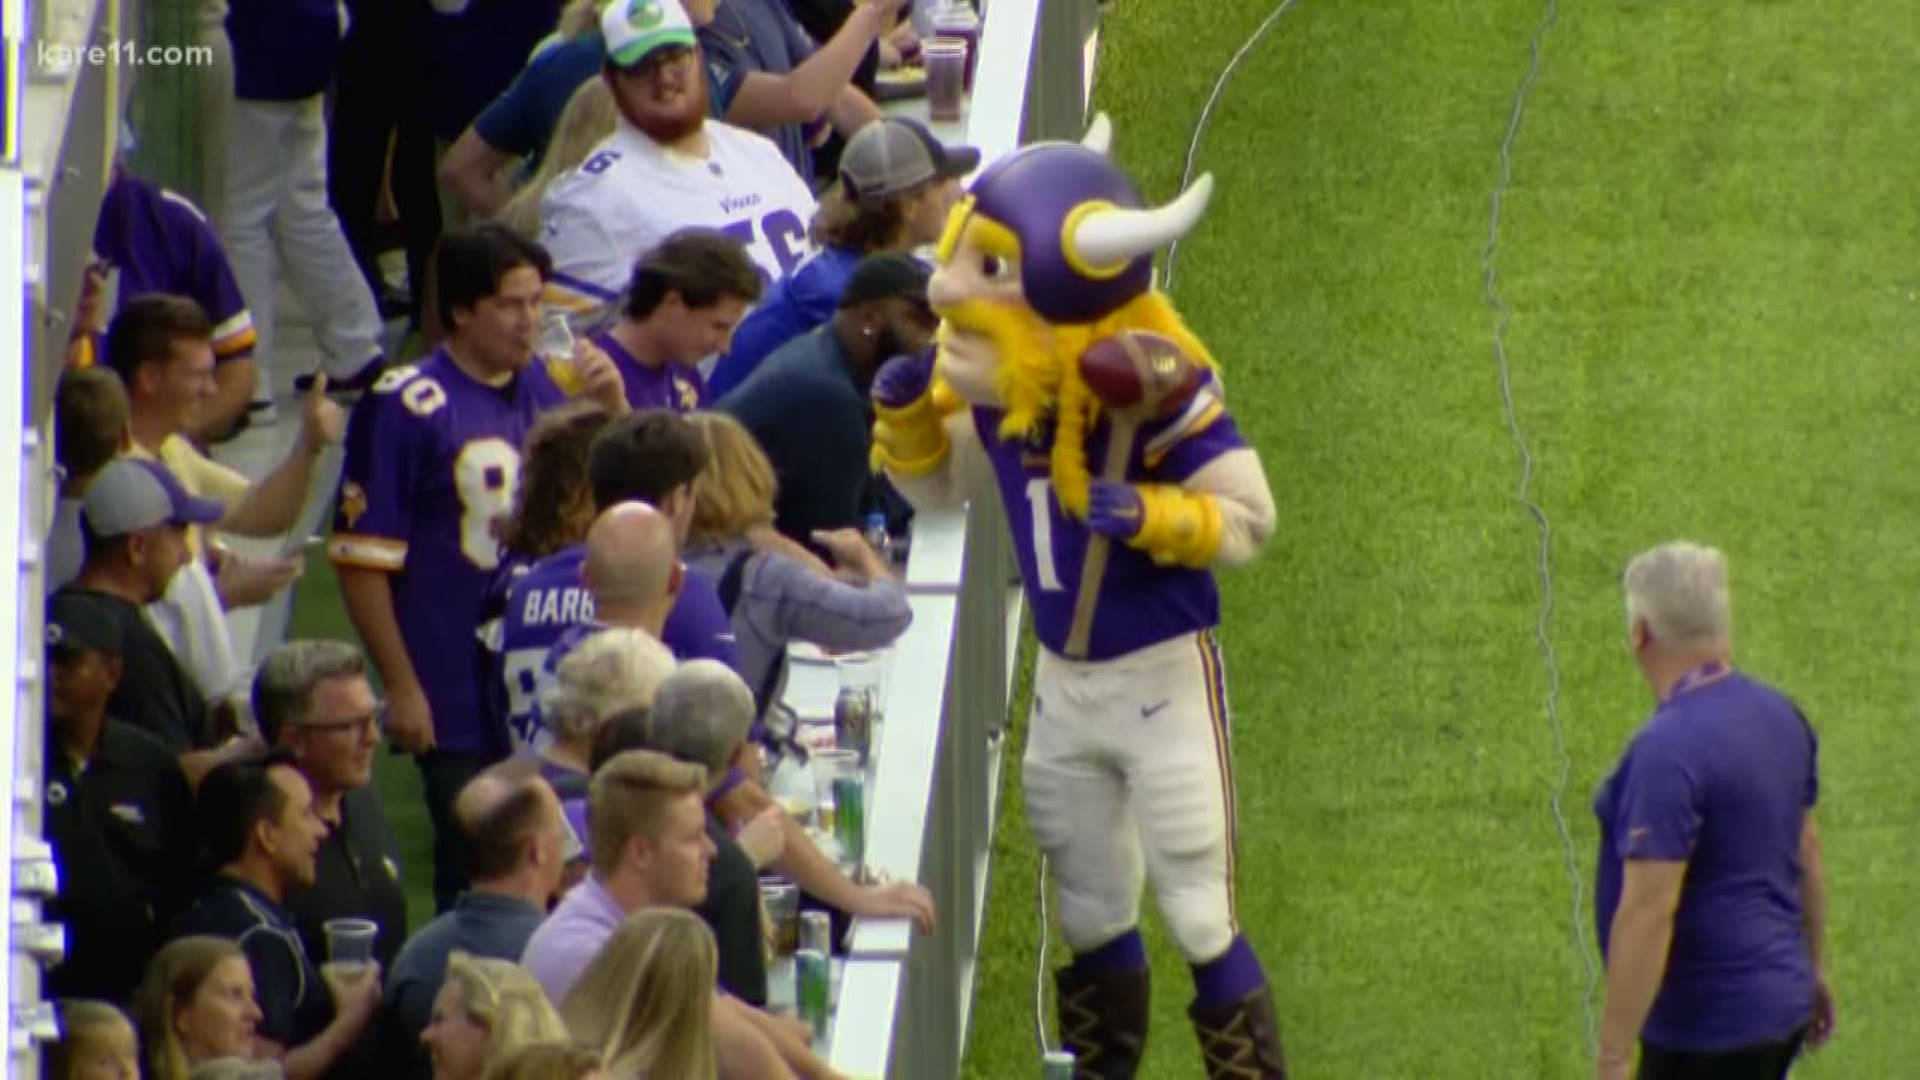 OK, so it's only the preseason. But the Vikings are 2-0, and fans are thinking Super Bowl.